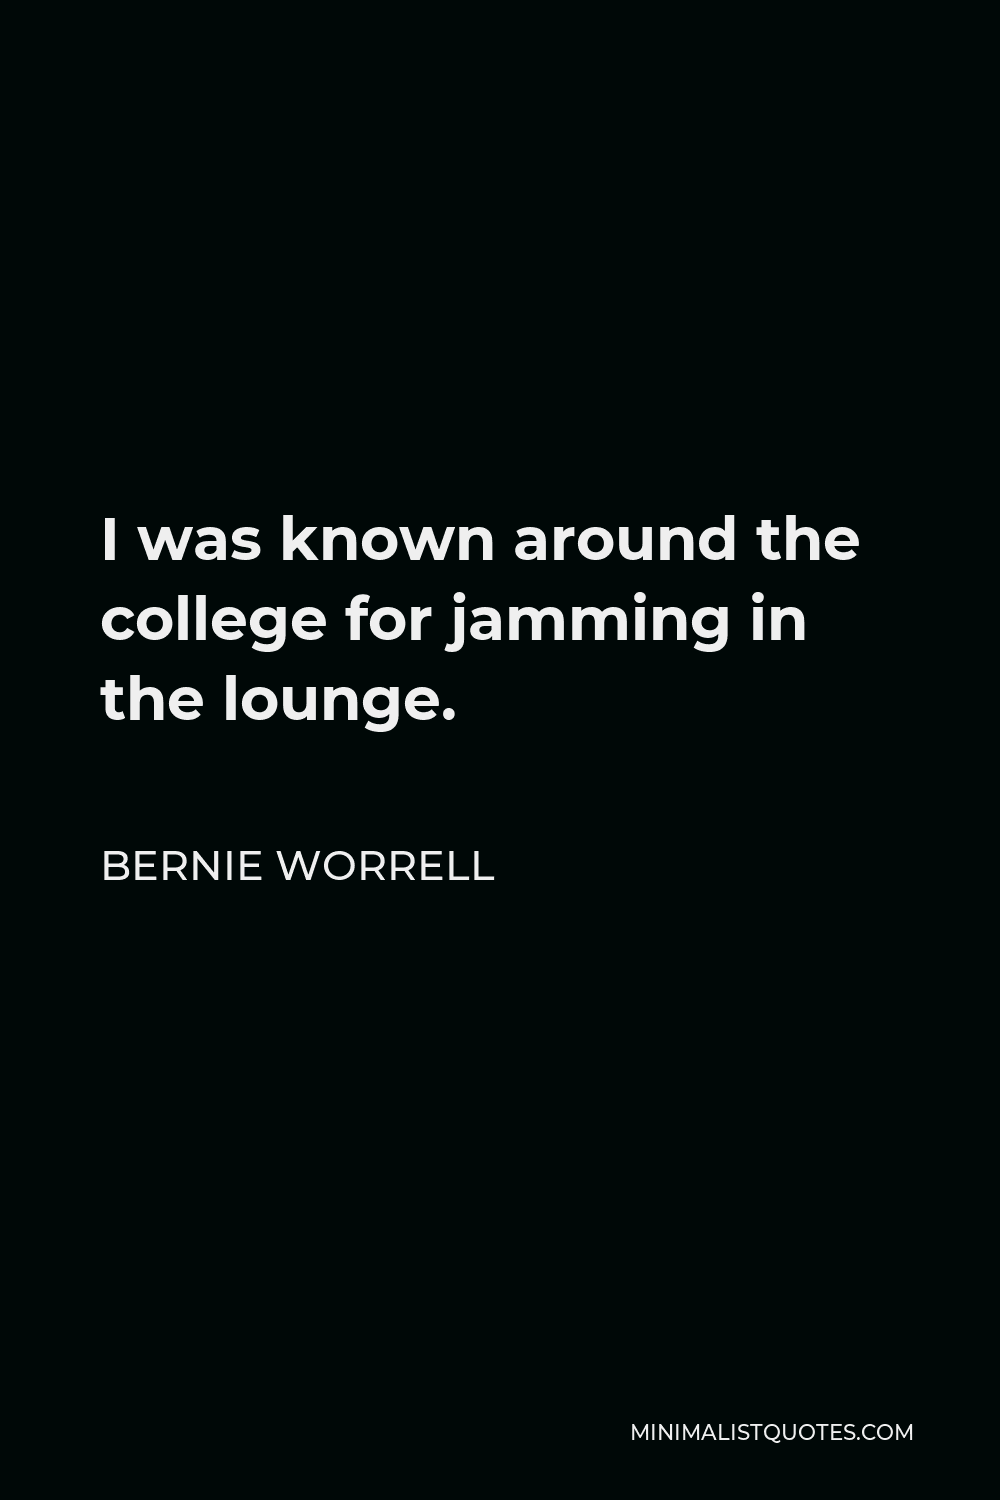 Bernie Worrell Quote - I was known around the college for jamming in the lounge.